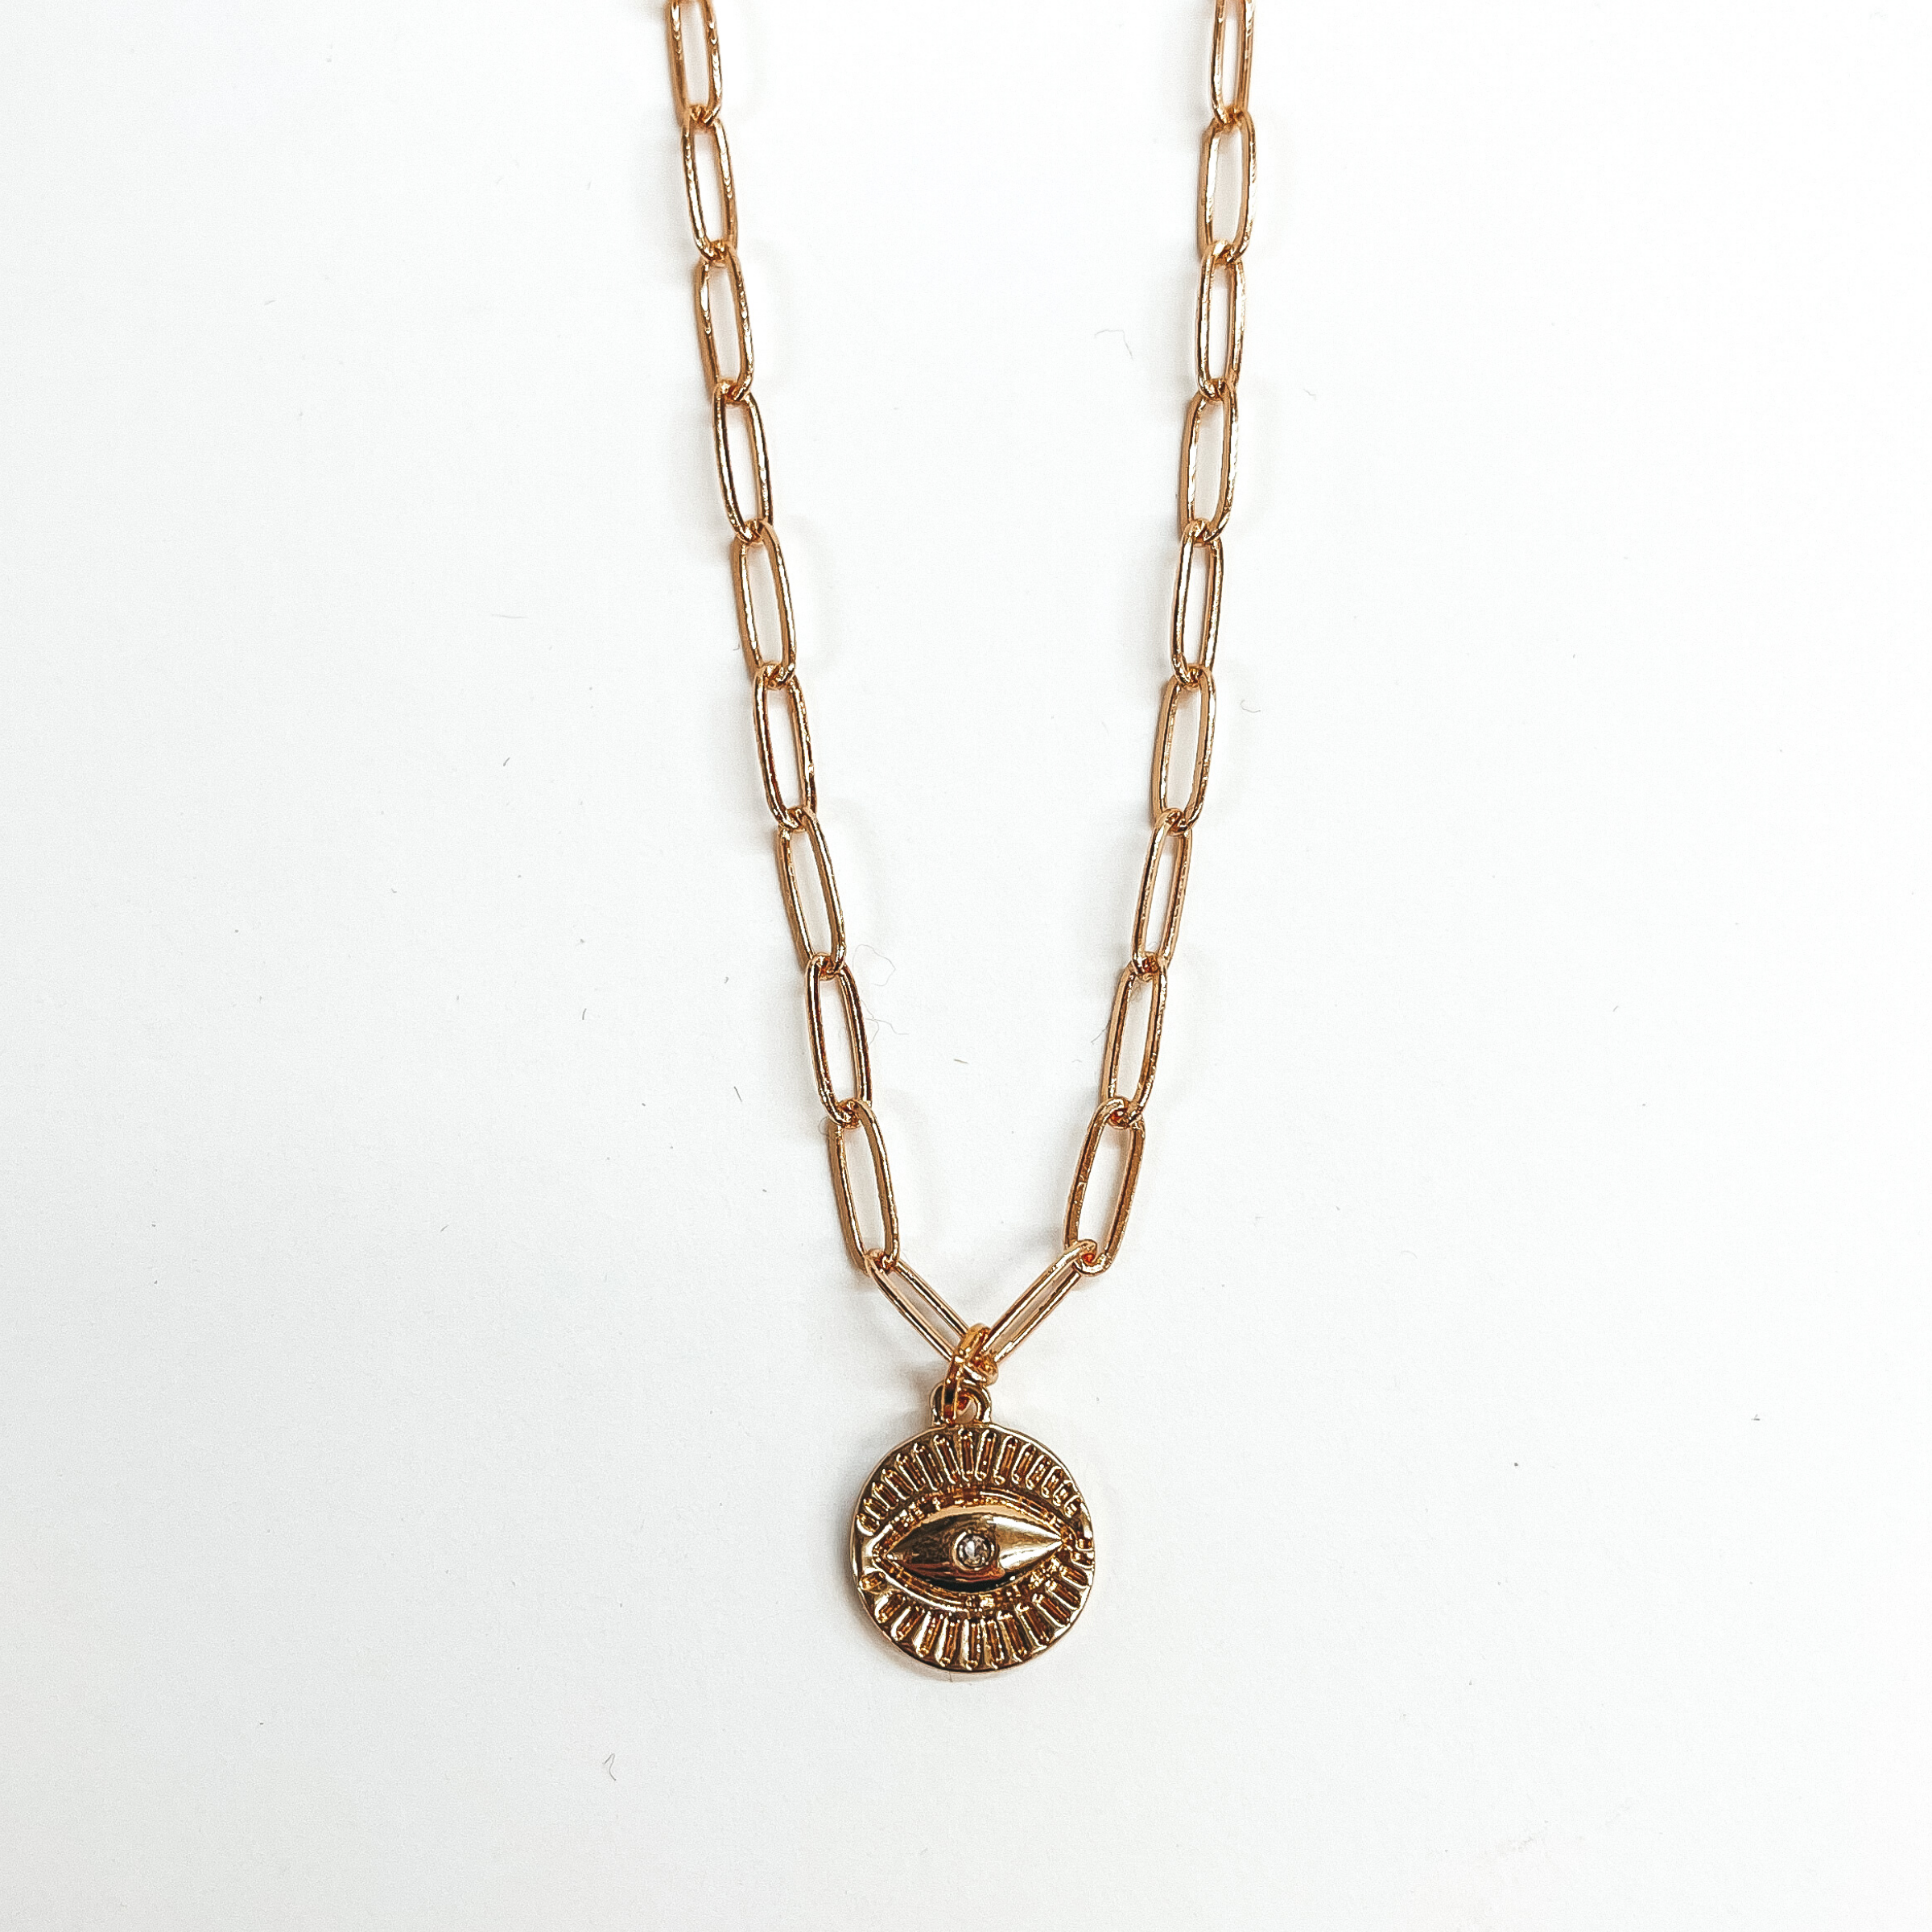 This is a gold paperclip chain necklace with a  gold evil eye pendant. This is taken on a white  background.